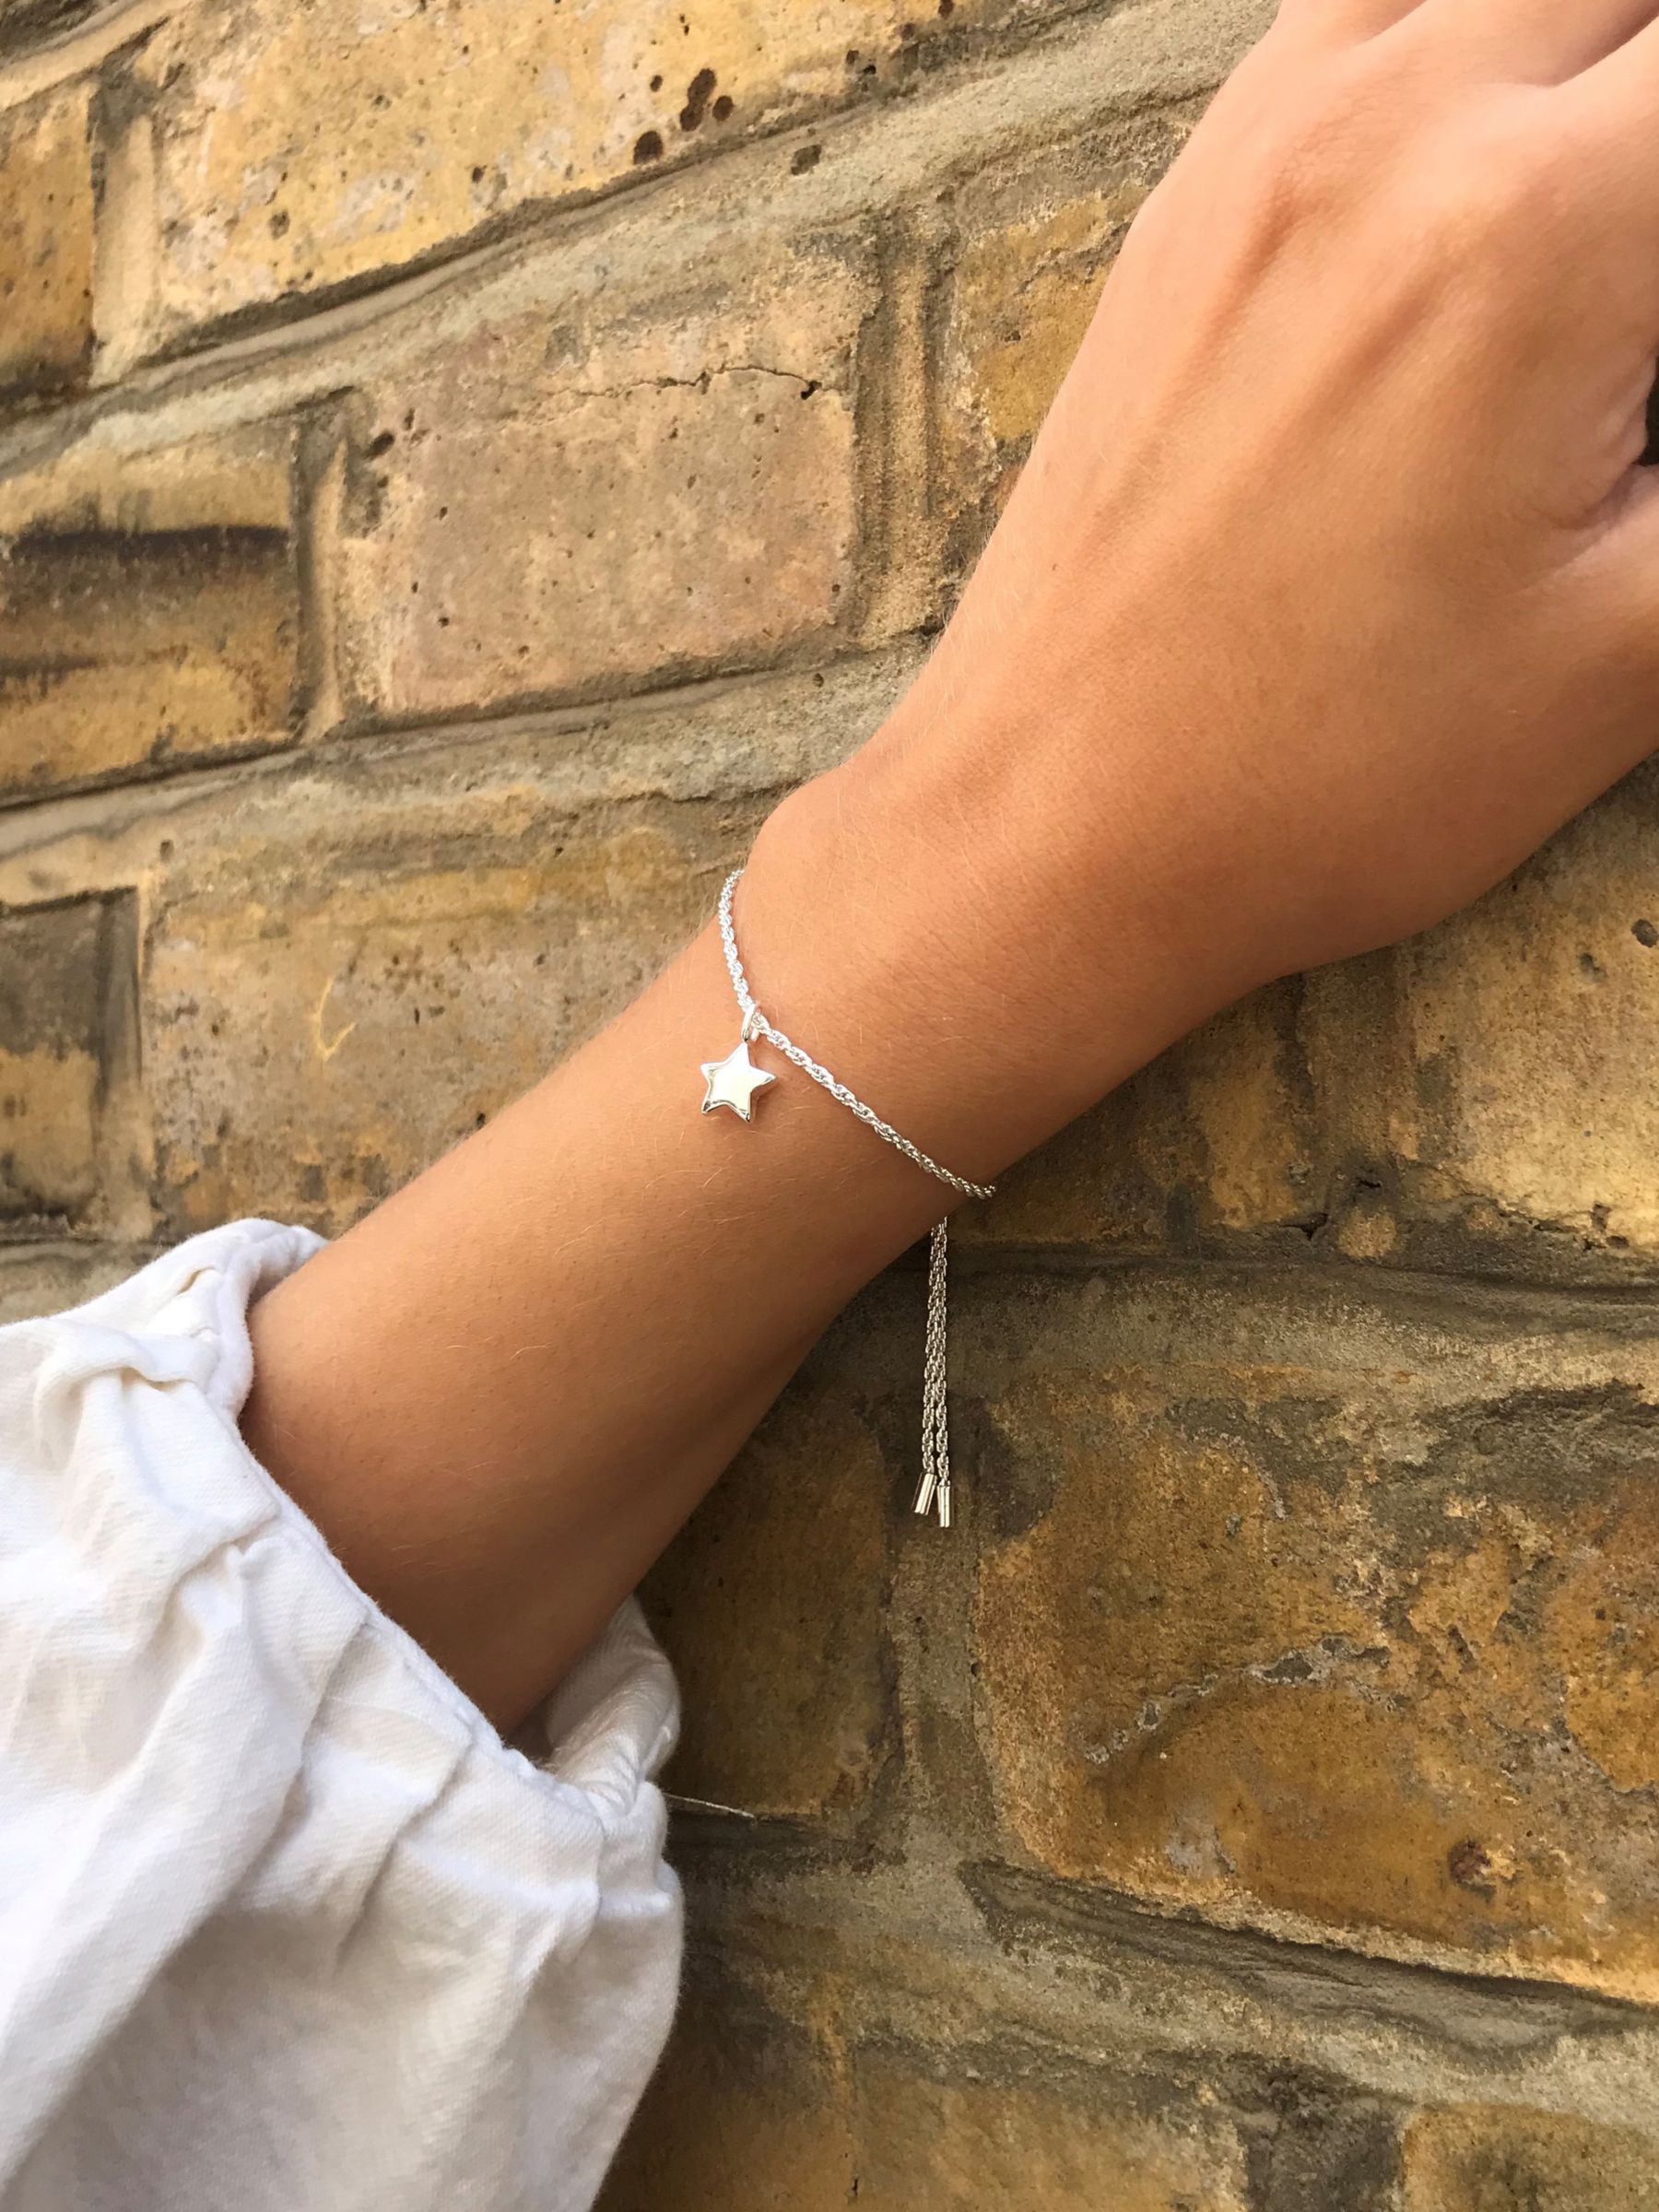 Stylish and cheap Bracelets - Up to 50% Off - Hot Gifts - Estella Bartlett  Sales Shop